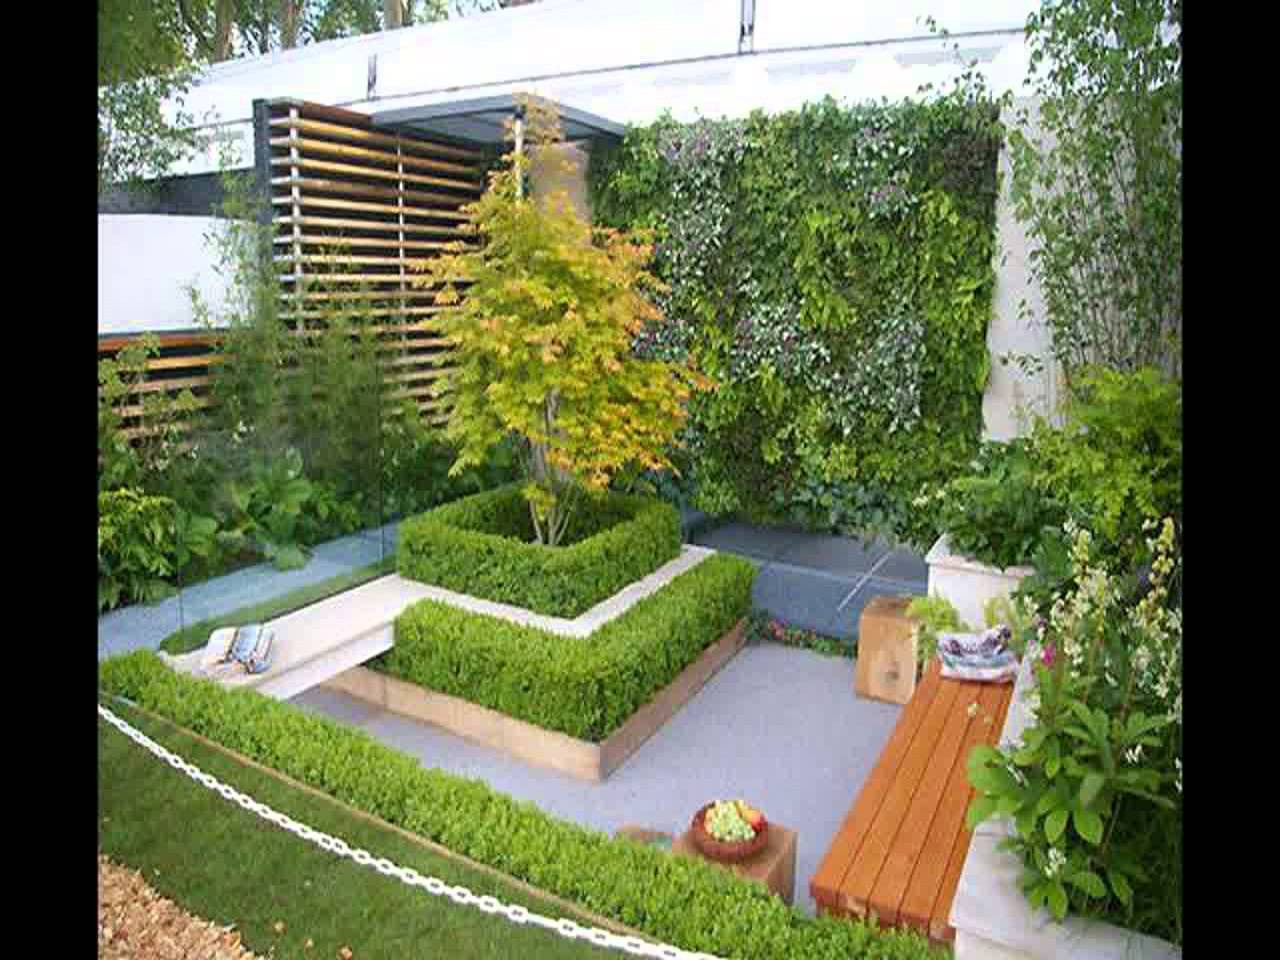 Backyard Ideas For Small Yards
 Landscaping Ideas Small Yard Patio Backyard This Tips